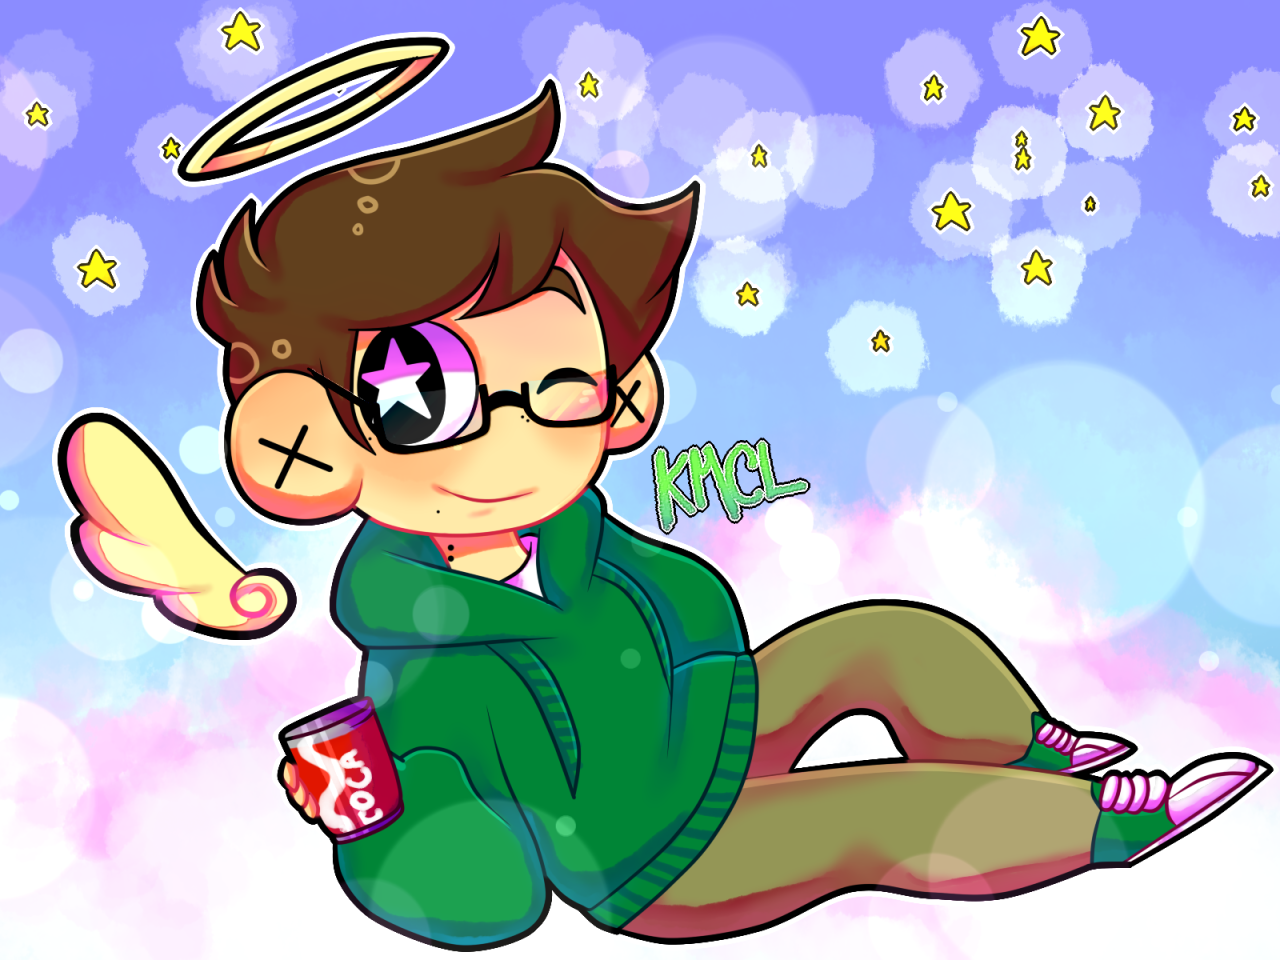 Hey eddheads! Its Edds birthday, so i make this for him, because i know that wherever him are, him will see it. Keep eddsworld on spining.